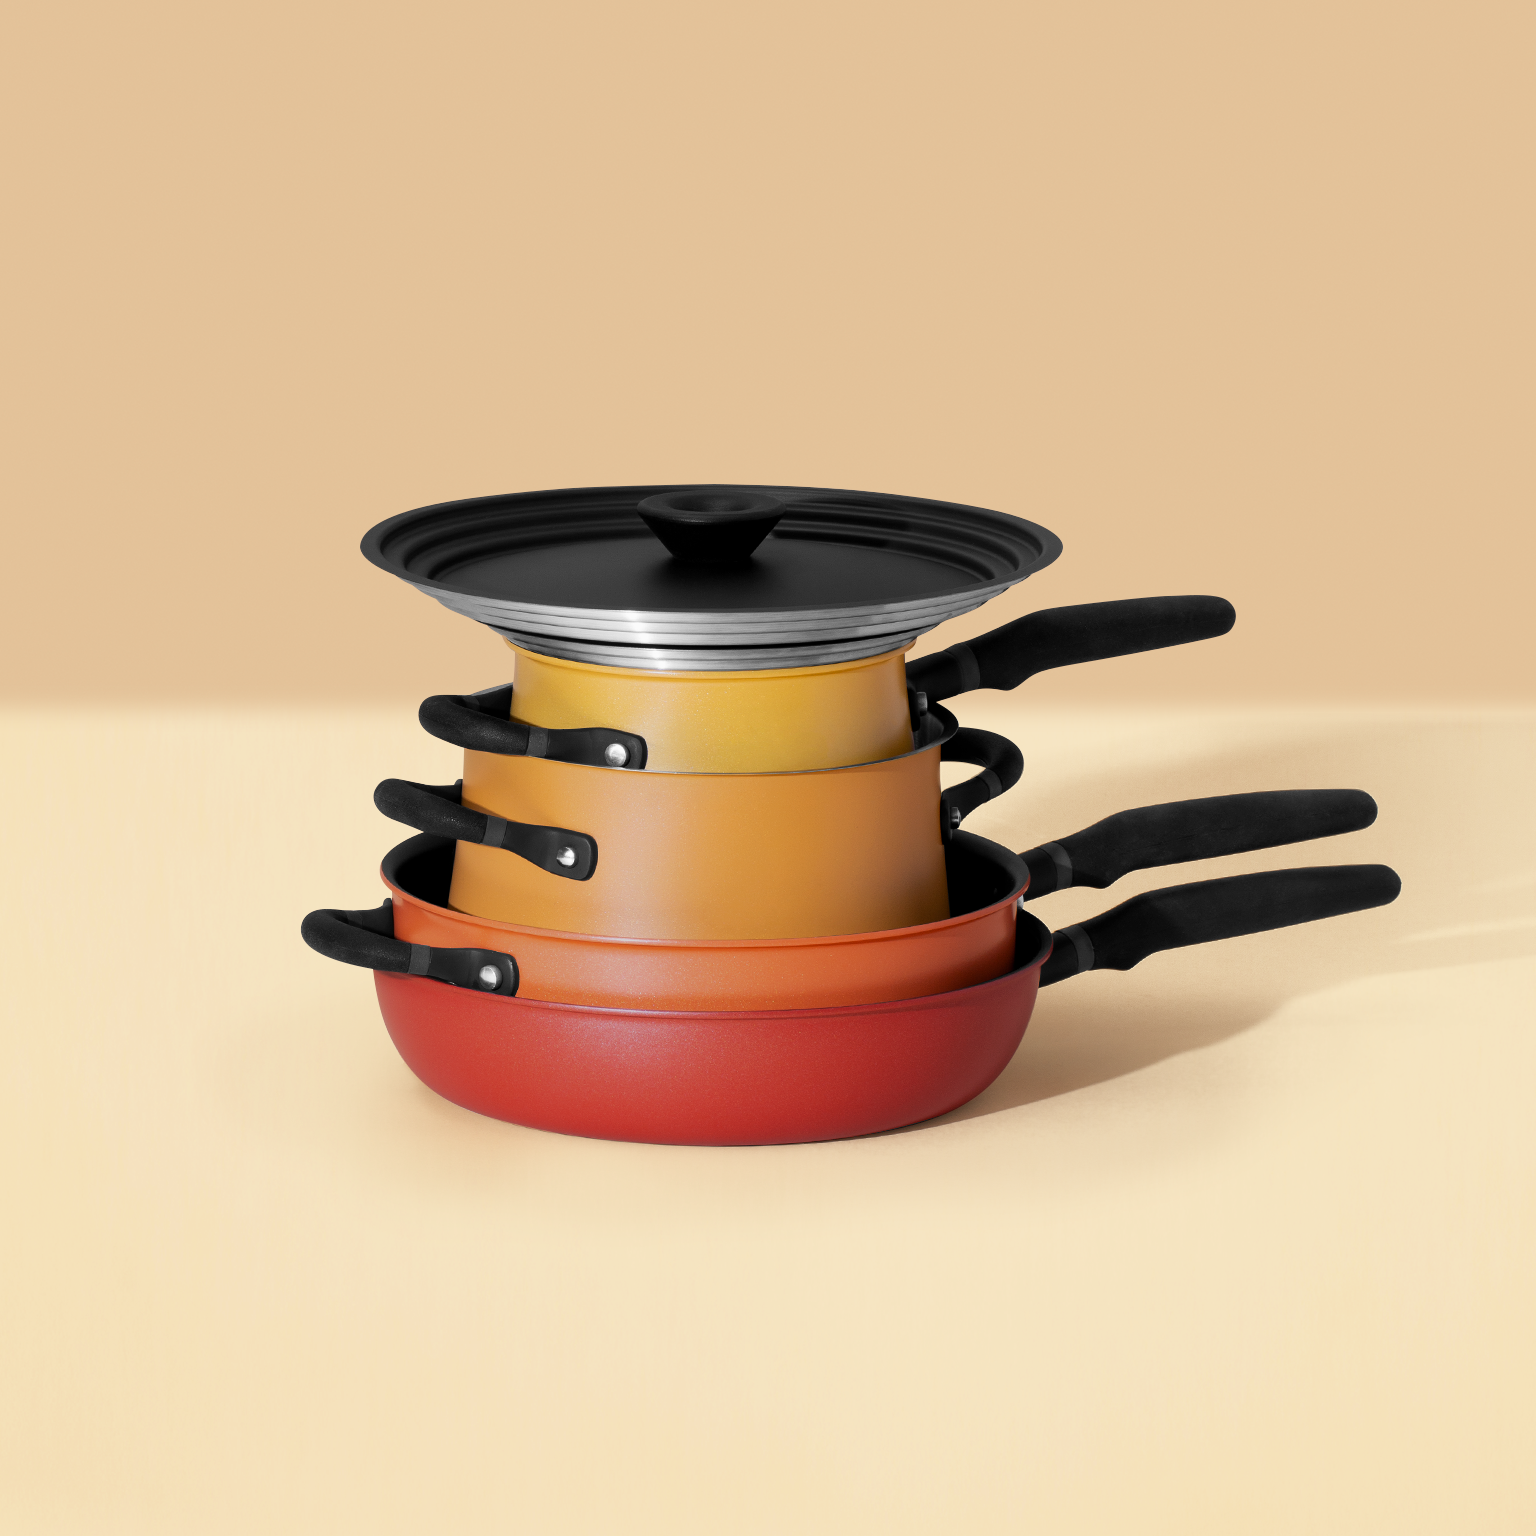 Stackable accent spark cookware set in yellow-orange tone